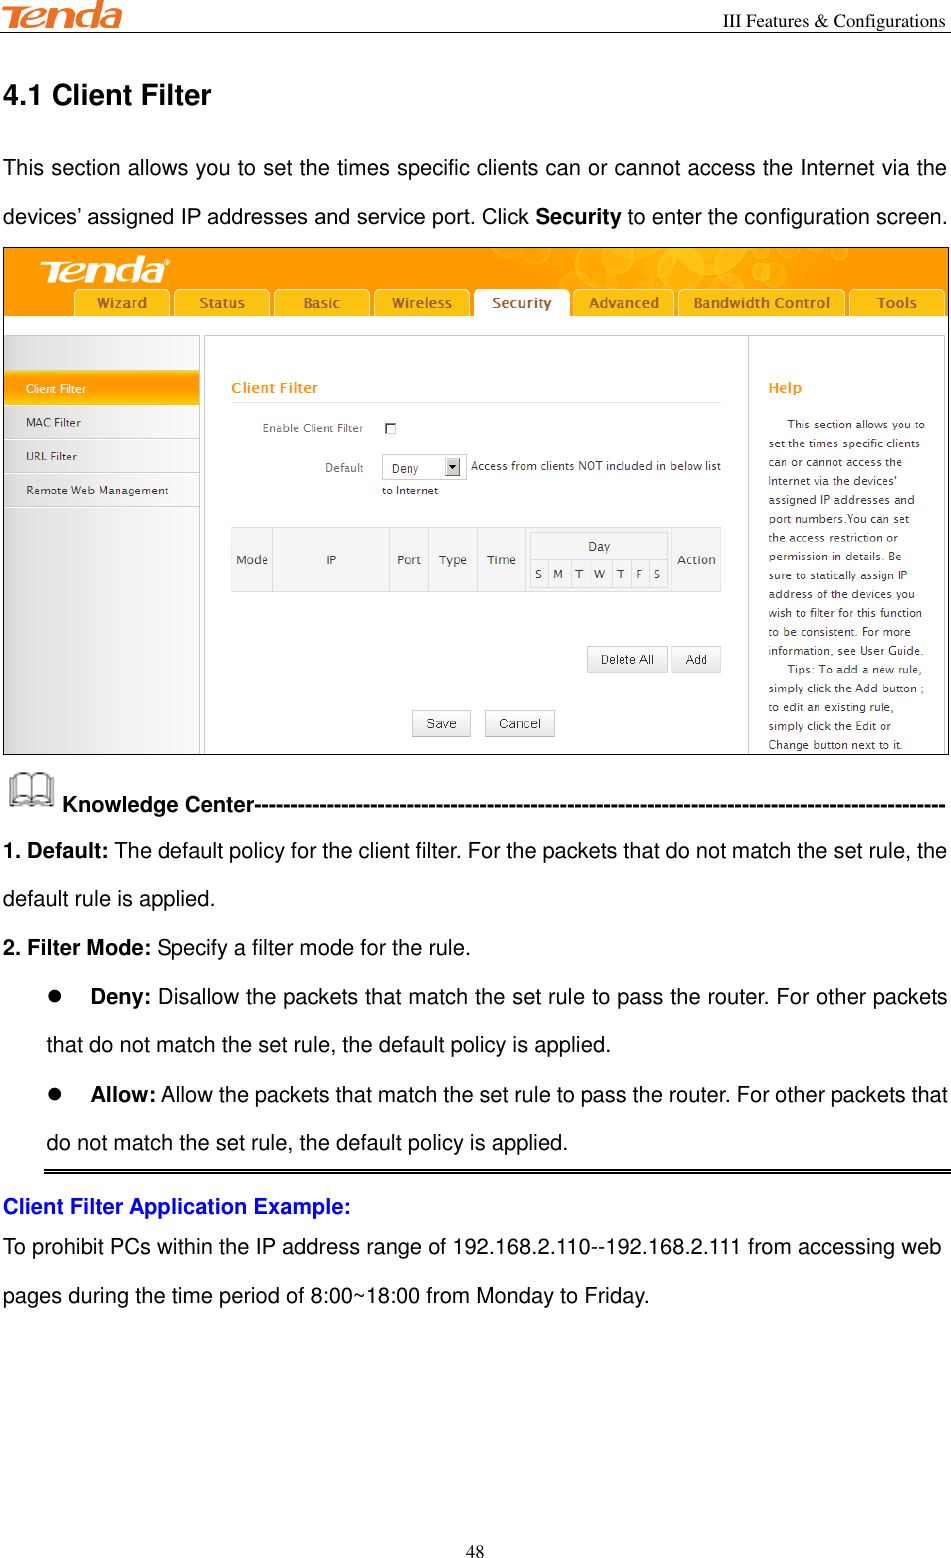                                                        III Features &amp; Configurations           48 4.1 Client Filter This section allows you to set the times specific clients can or cannot access the Internet via the devices’ assigned IP addresses and service port. Click Security to enter the configuration screen.  Knowledge Center----------------------------------------------------------------------------------------------- 1. Default: The default policy for the client filter. For the packets that do not match the set rule, the default rule is applied. 2. Filter Mode: Specify a filter mode for the rule.  Deny: Disallow the packets that match the set rule to pass the router. For other packets that do not match the set rule, the default policy is applied.  Allow: Allow the packets that match the set rule to pass the router. For other packets that do not match the set rule, the default policy is applied. Client Filter Application Example: To prohibit PCs within the IP address range of 192.168.2.110--192.168.2.111 from accessing web pages during the time period of 8:00~18:00 from Monday to Friday. 